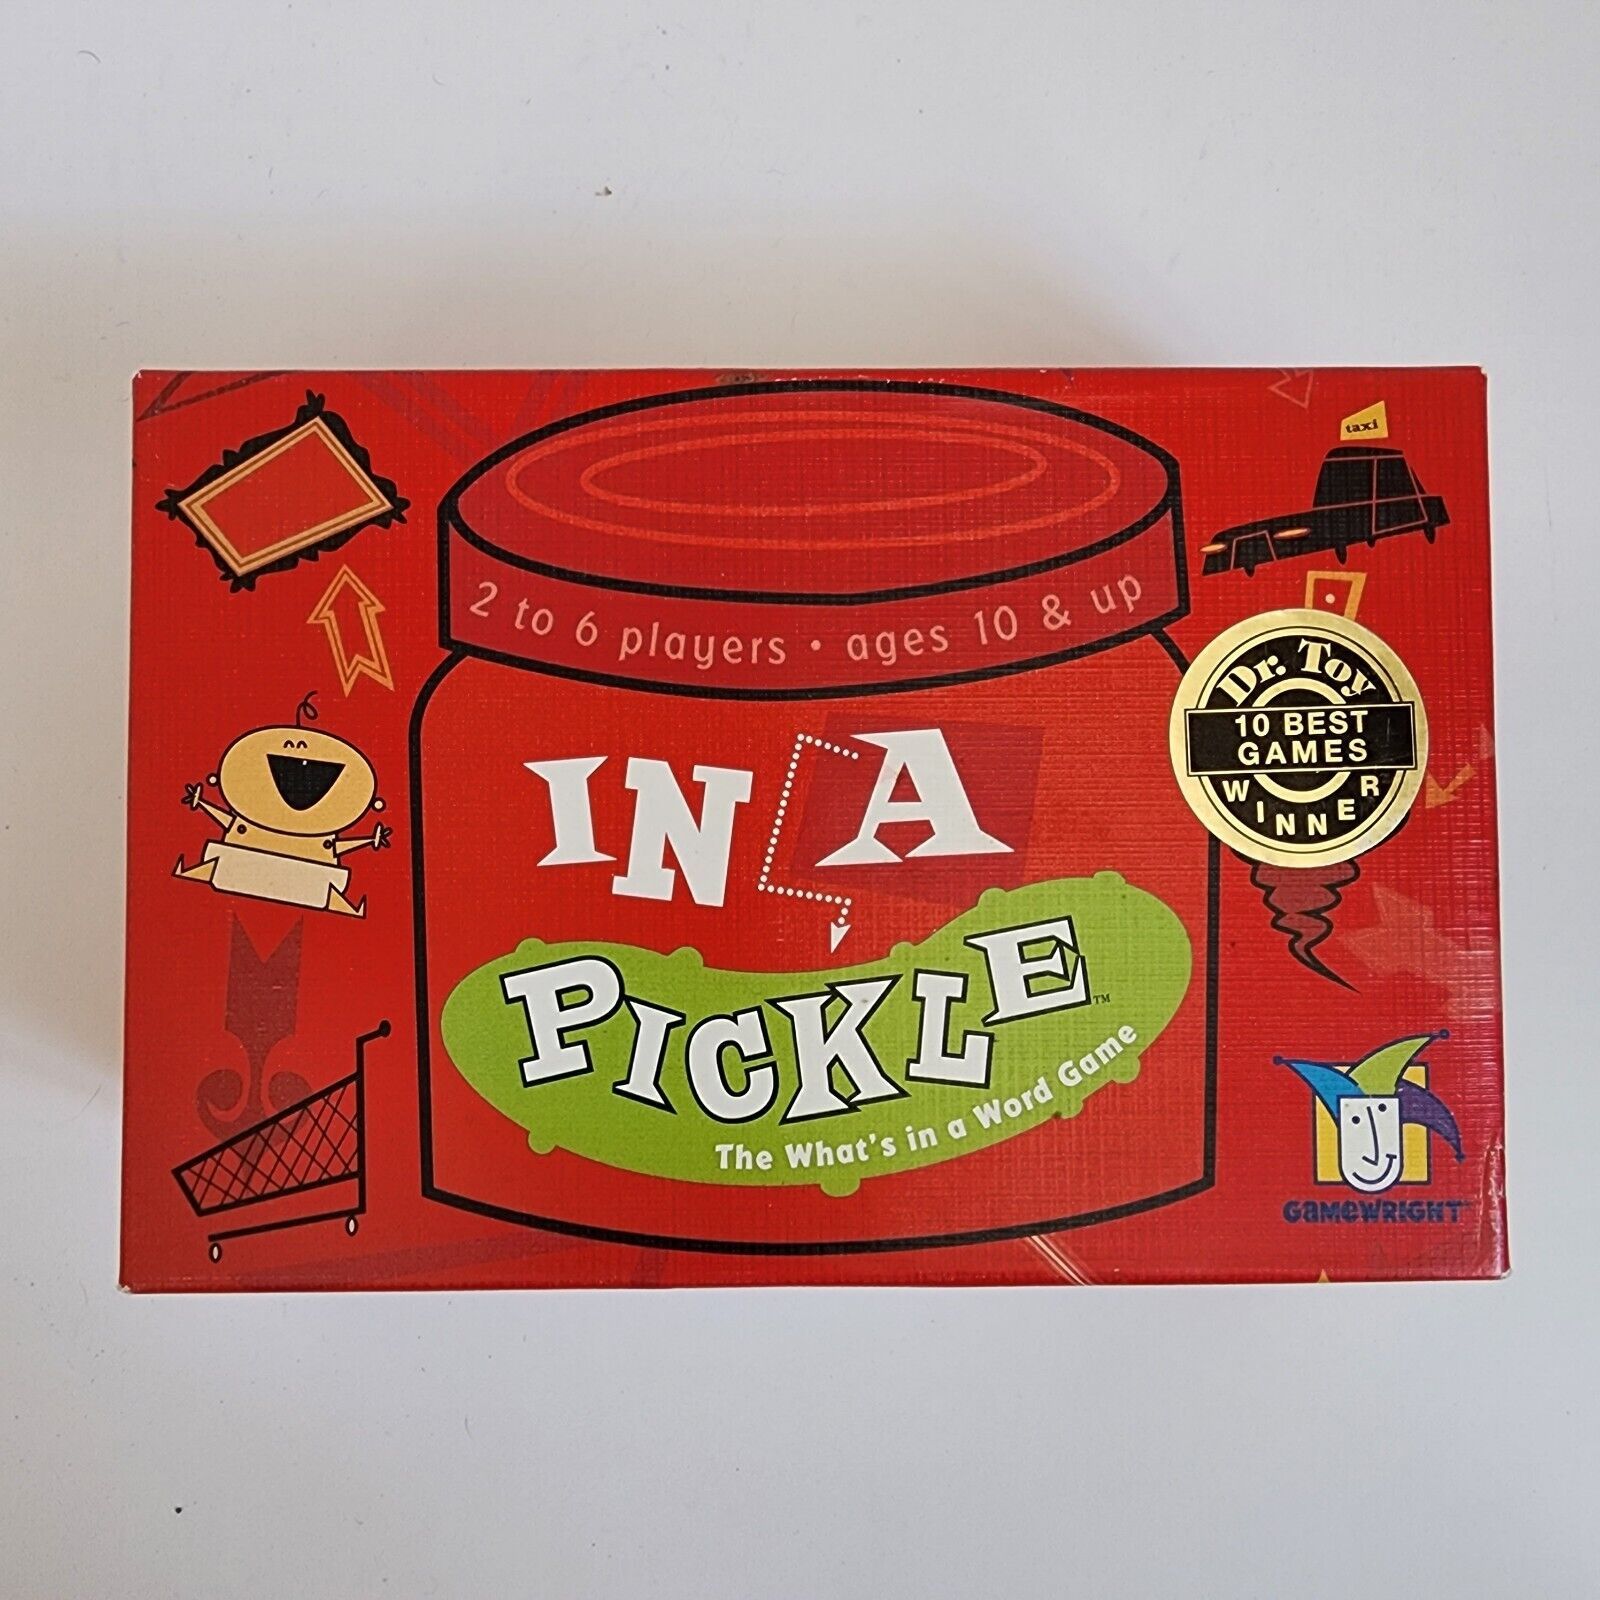 In a Pickle Game, Age 10+, 2-6 players, Dr. Toy 10 best games winner Word Game - $8.59